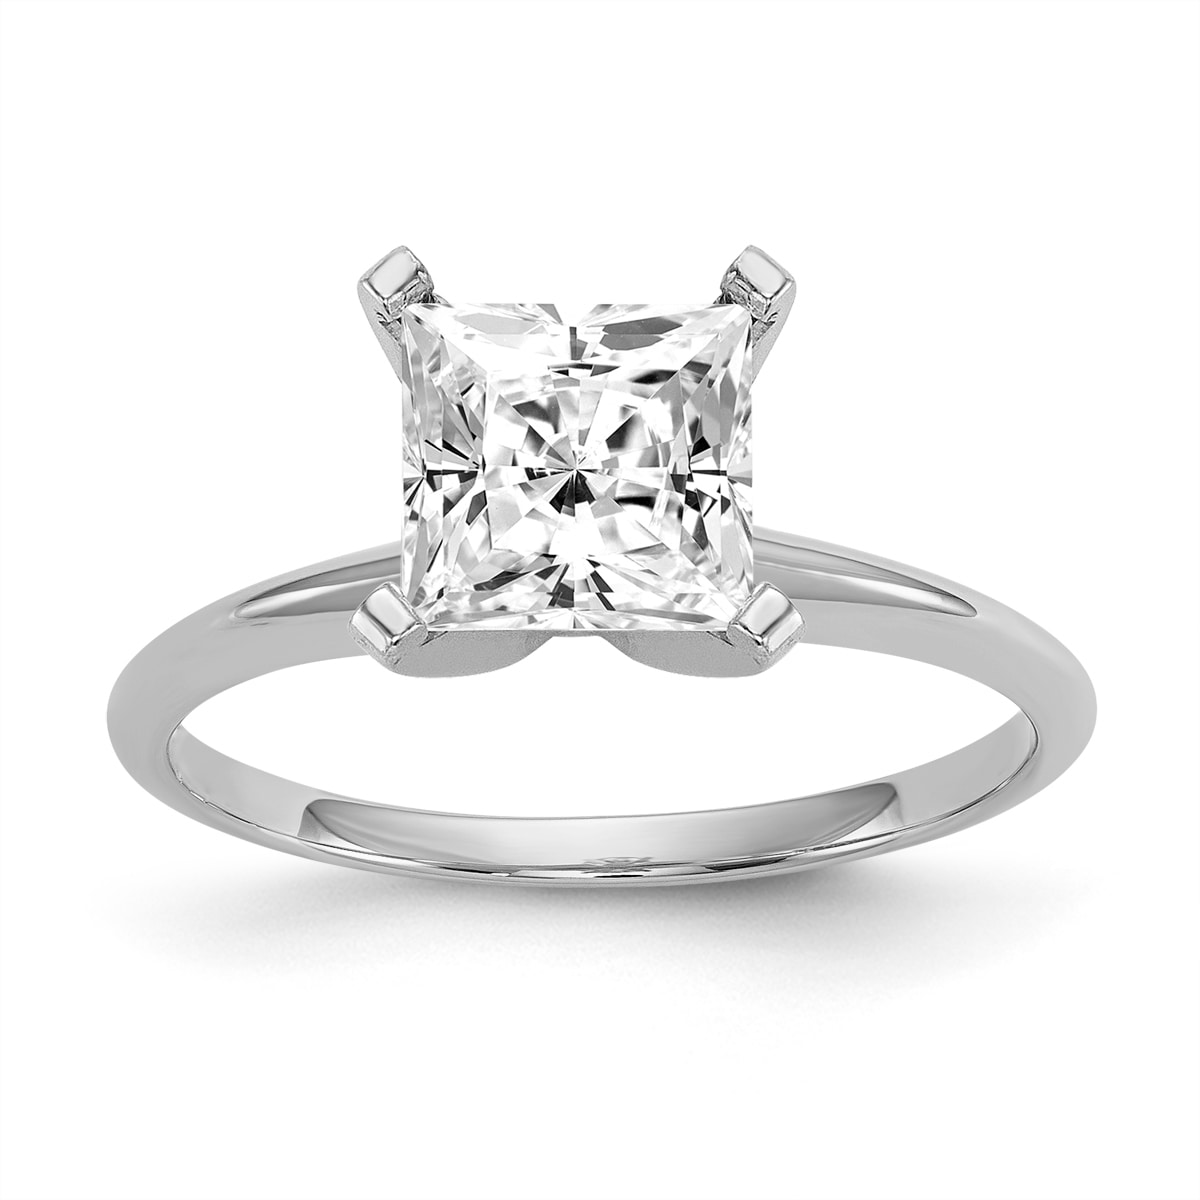 14k White Gold 2 1/3ct Moissanite Princess Solitaire Ring by Versil